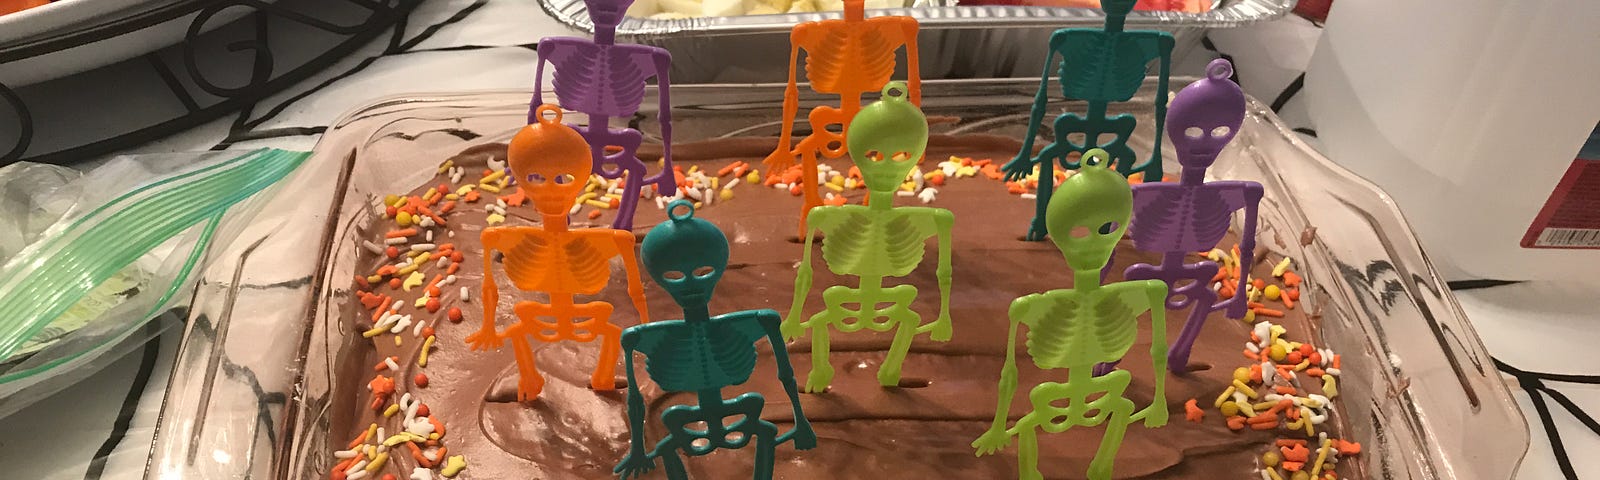 Halloween dinner can be made fun with a themed sweet treat for the finale. Photo by Francesca Di Meglio